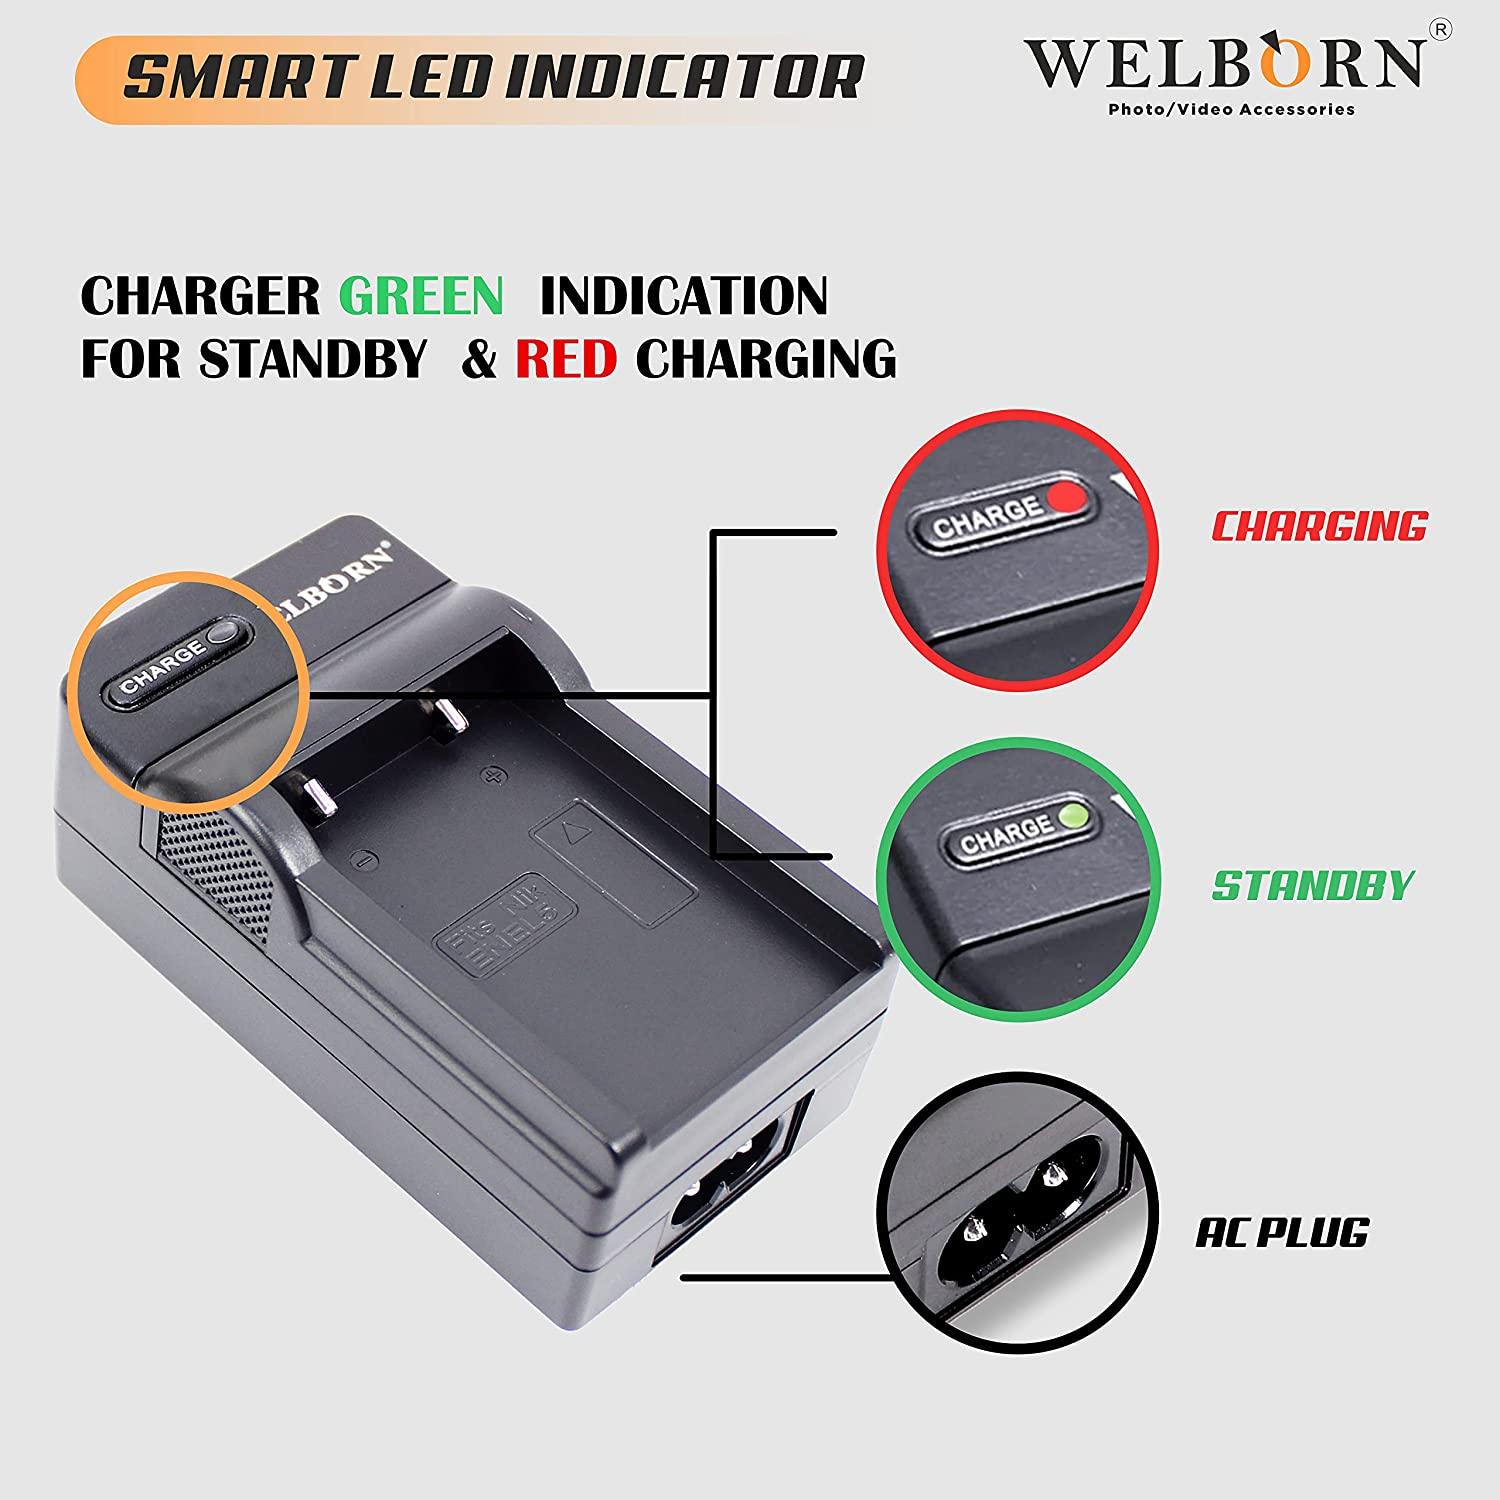 Camera Battery Charger for EN-EL5 Battery (6 month warranty)-Camera Battery Chargers-dealsplant